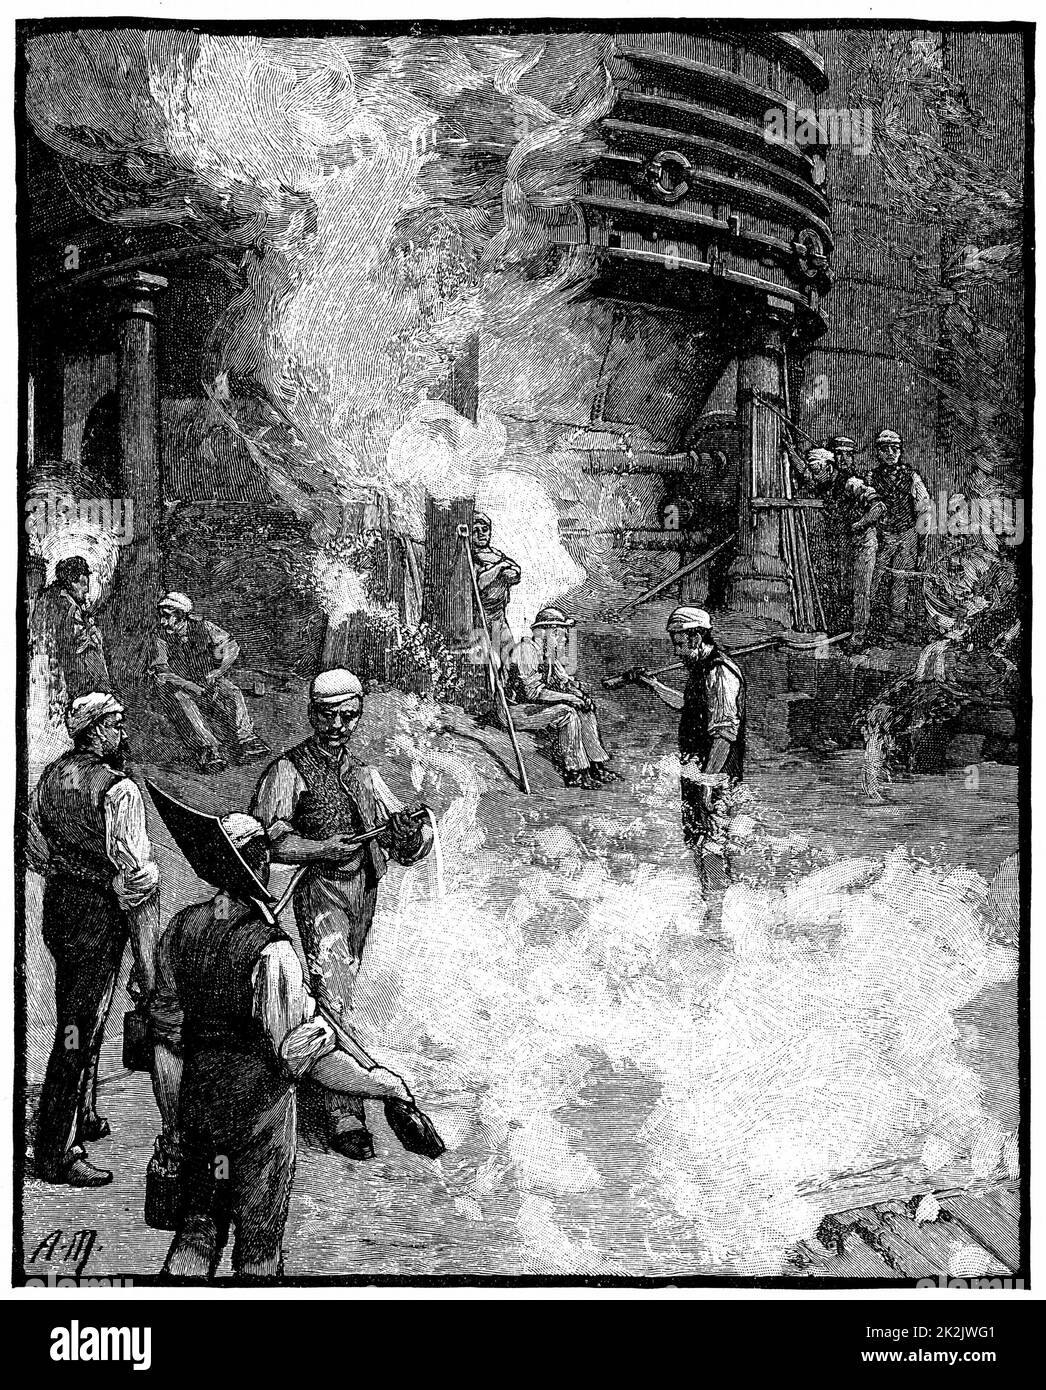 Tapping blast furnace and casting iron into 'pigs, Siemens Iron and Steel Works, Landore, South Wales. From 'The English Illustrated Magazine', London, 1885. Engraving Stock Photo